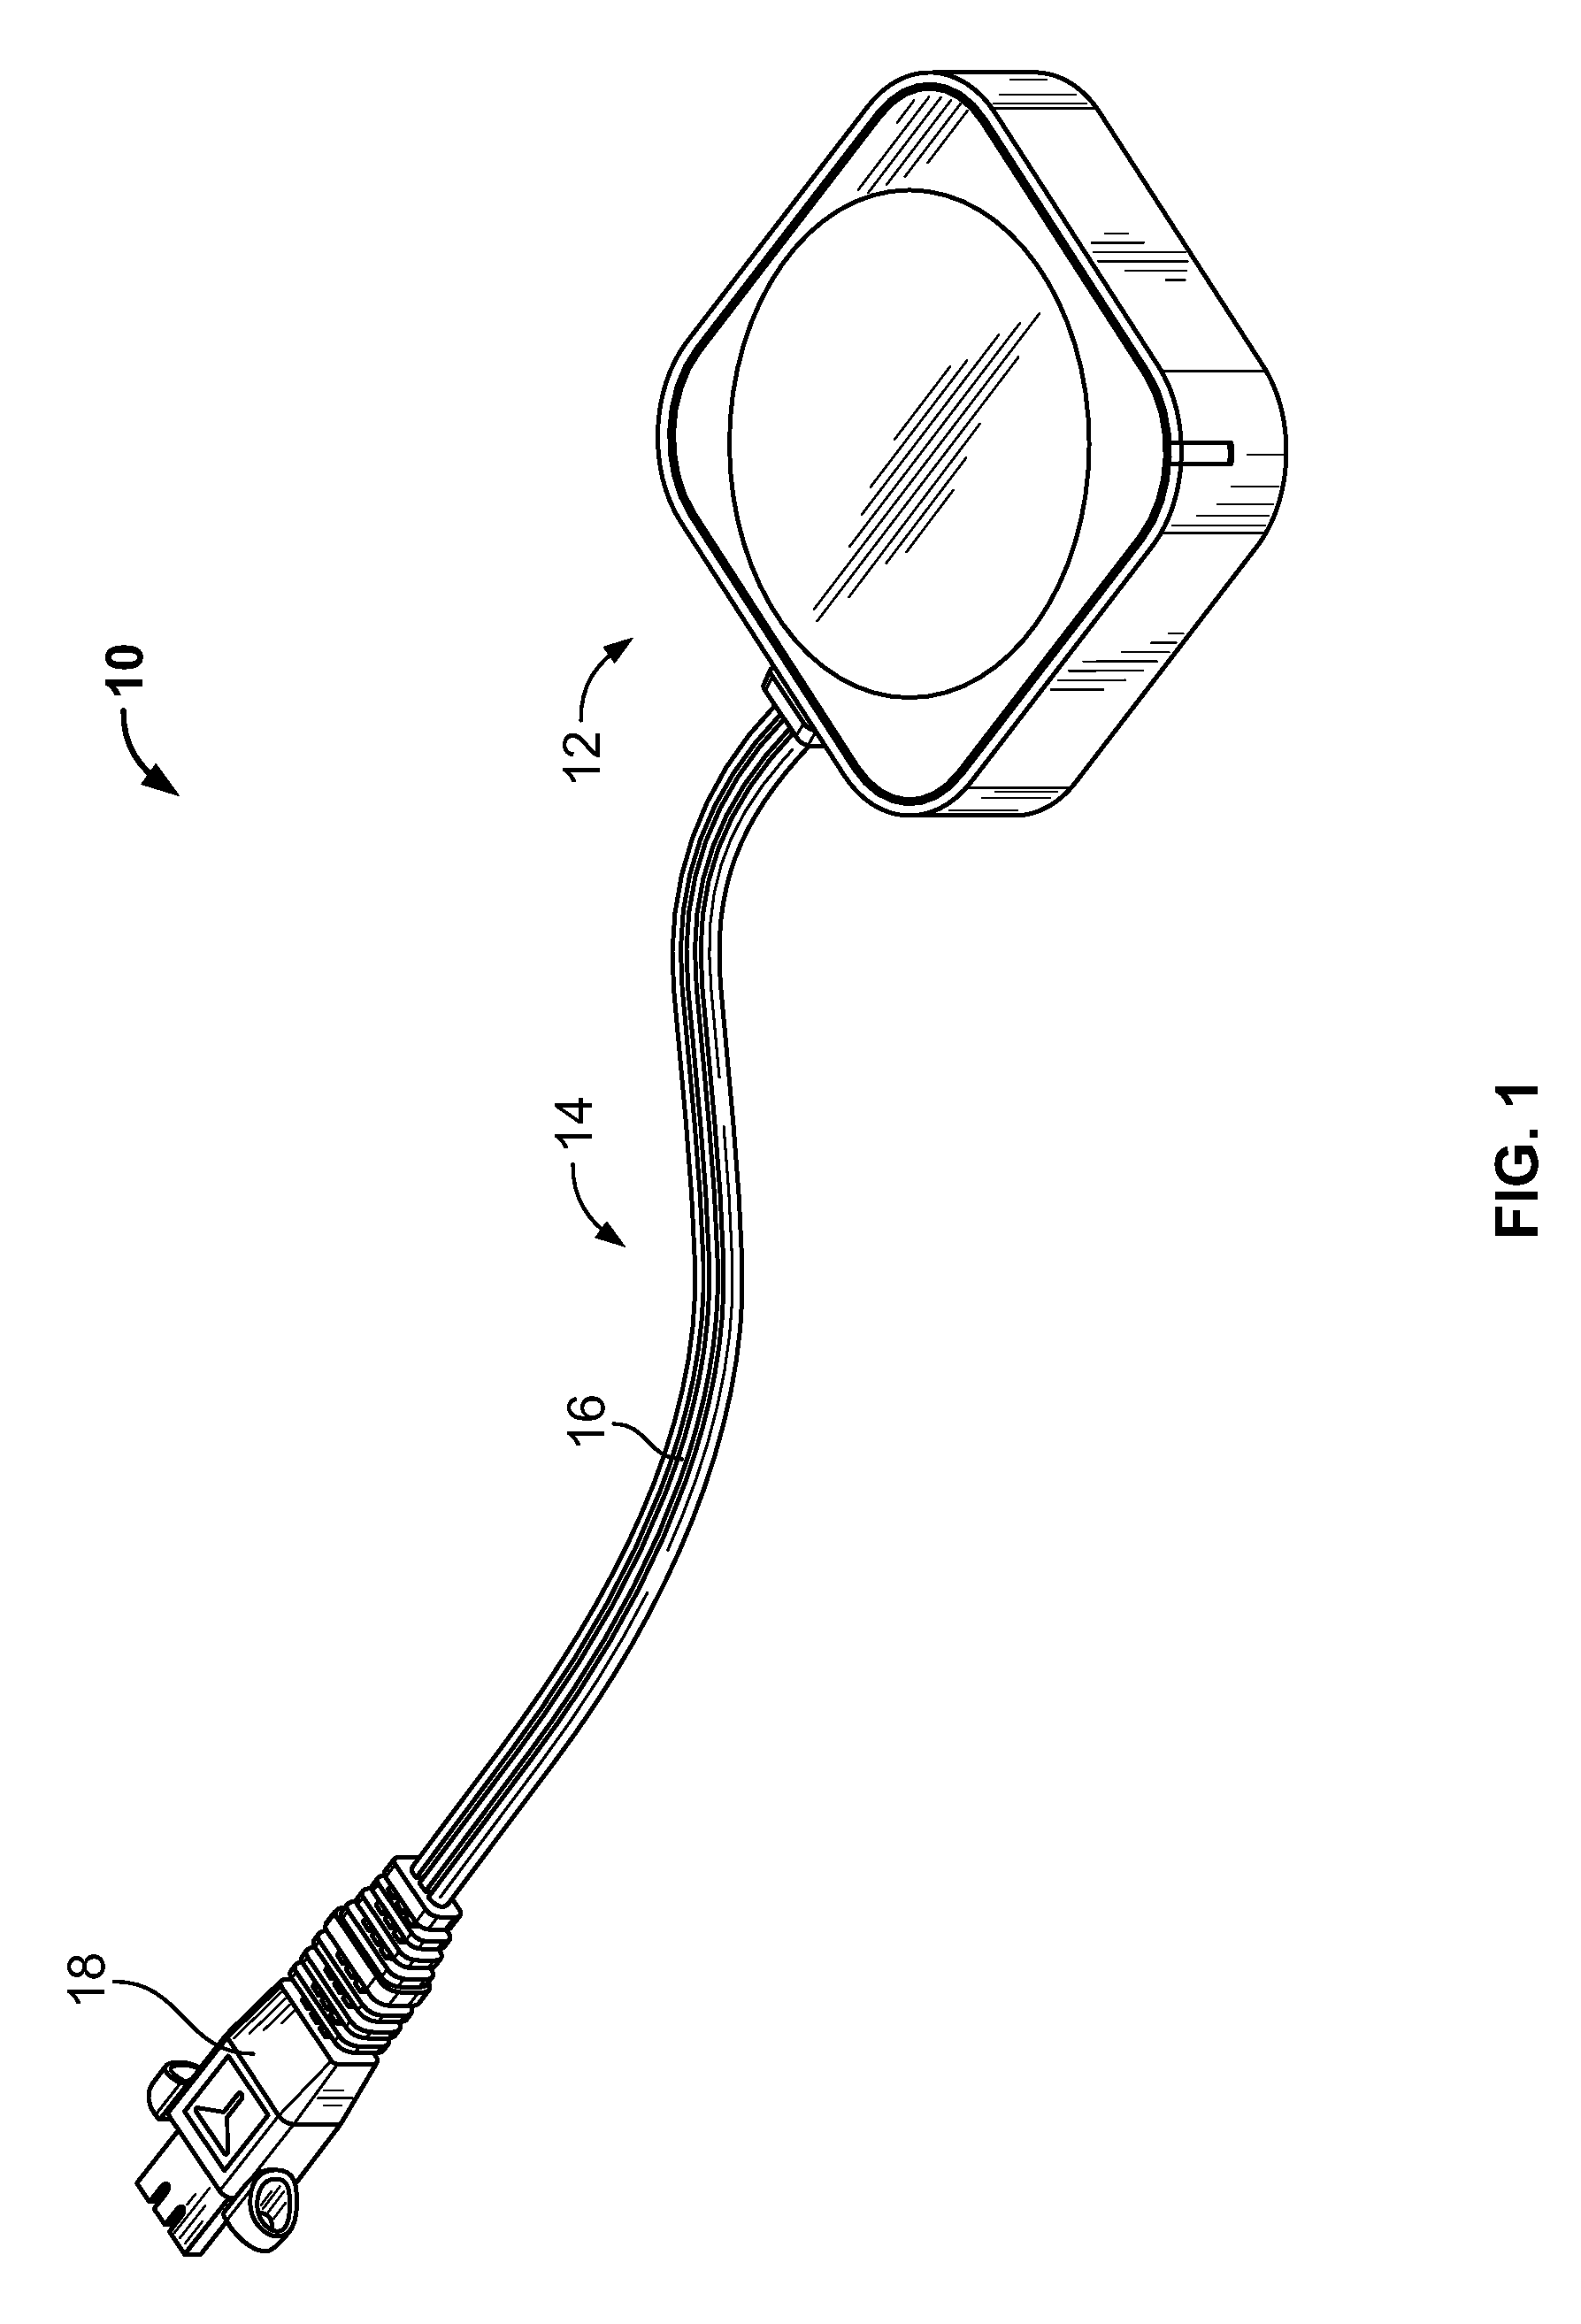 Antenna assembly having multiple antenna elements with hemispherical coverage